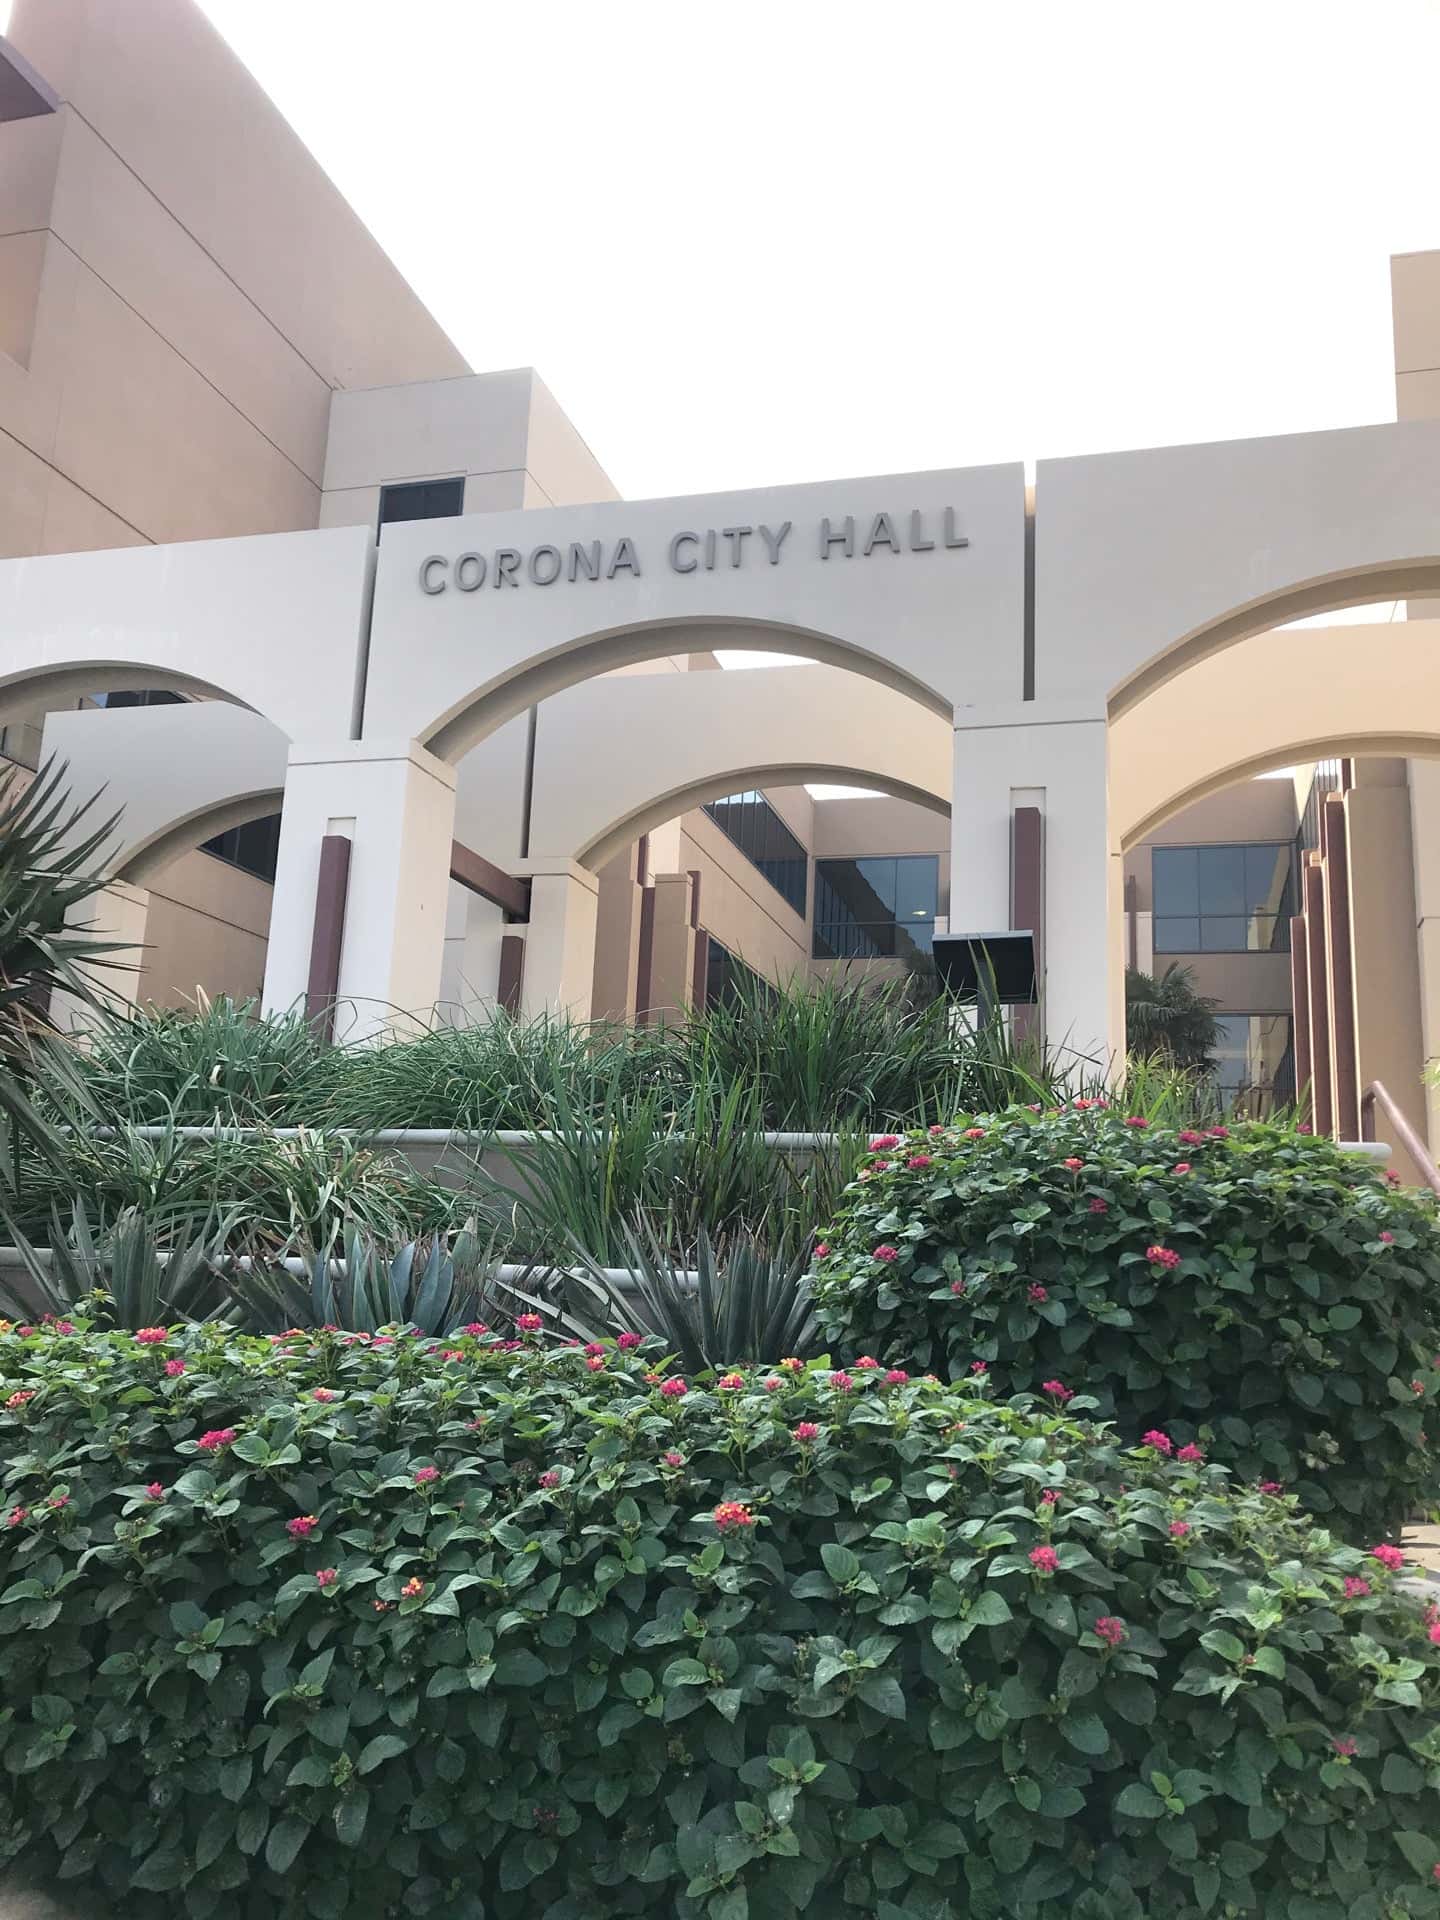 $41k in Corona payout over public-records request overturned